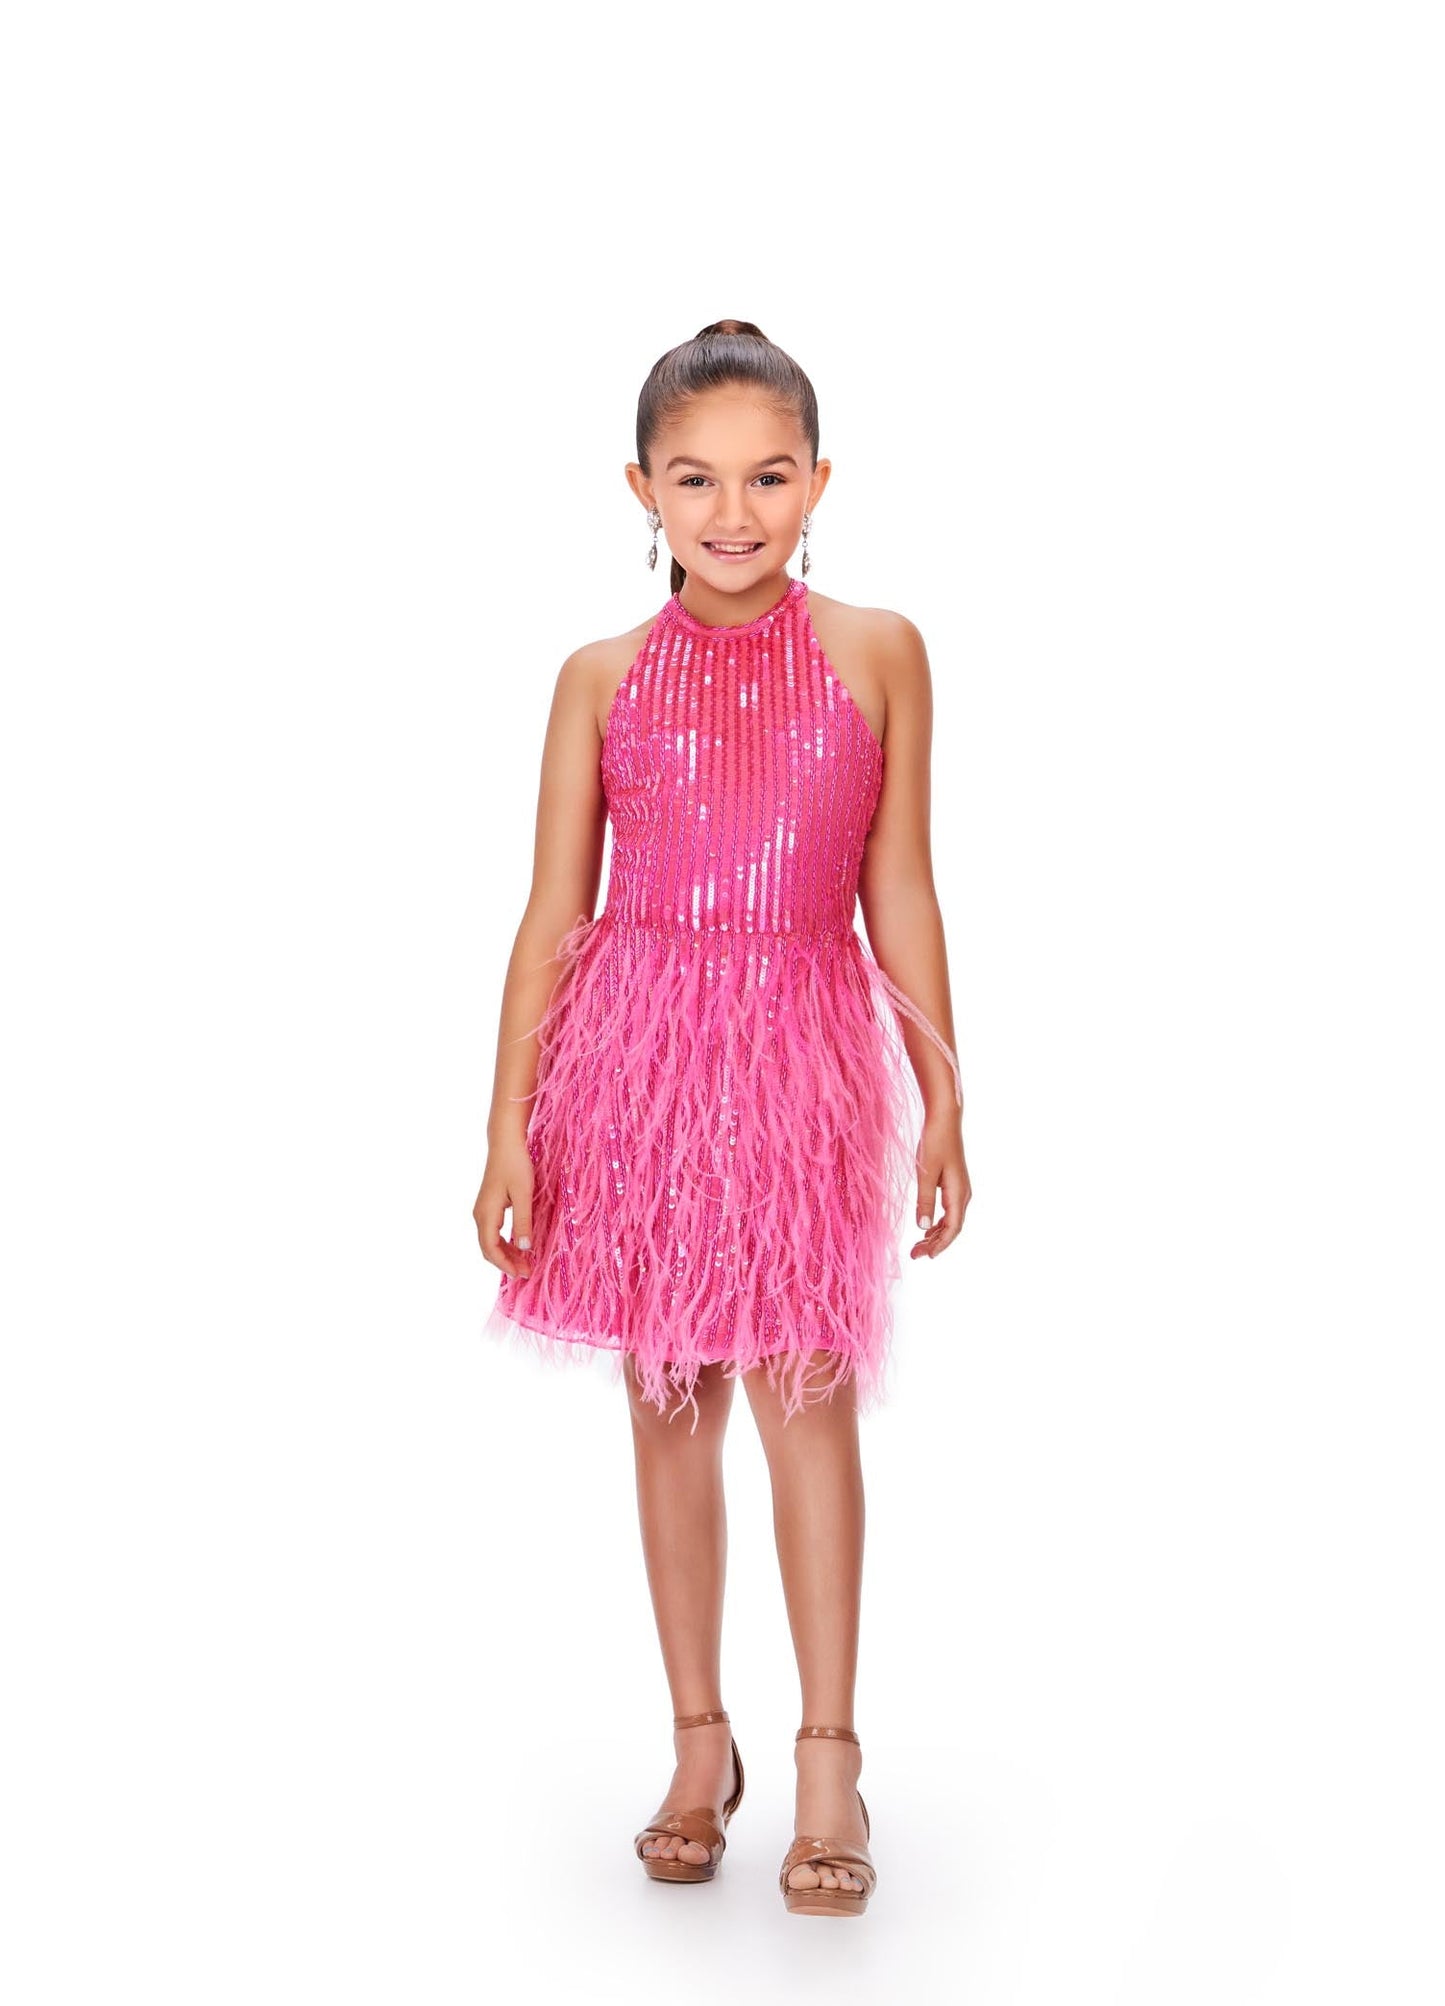 Ashley Lauren Kids 8196 Size 10 Orchid Fully Beaded Girls Cocktail Dress Halter Top With Feather A-Line Skirt